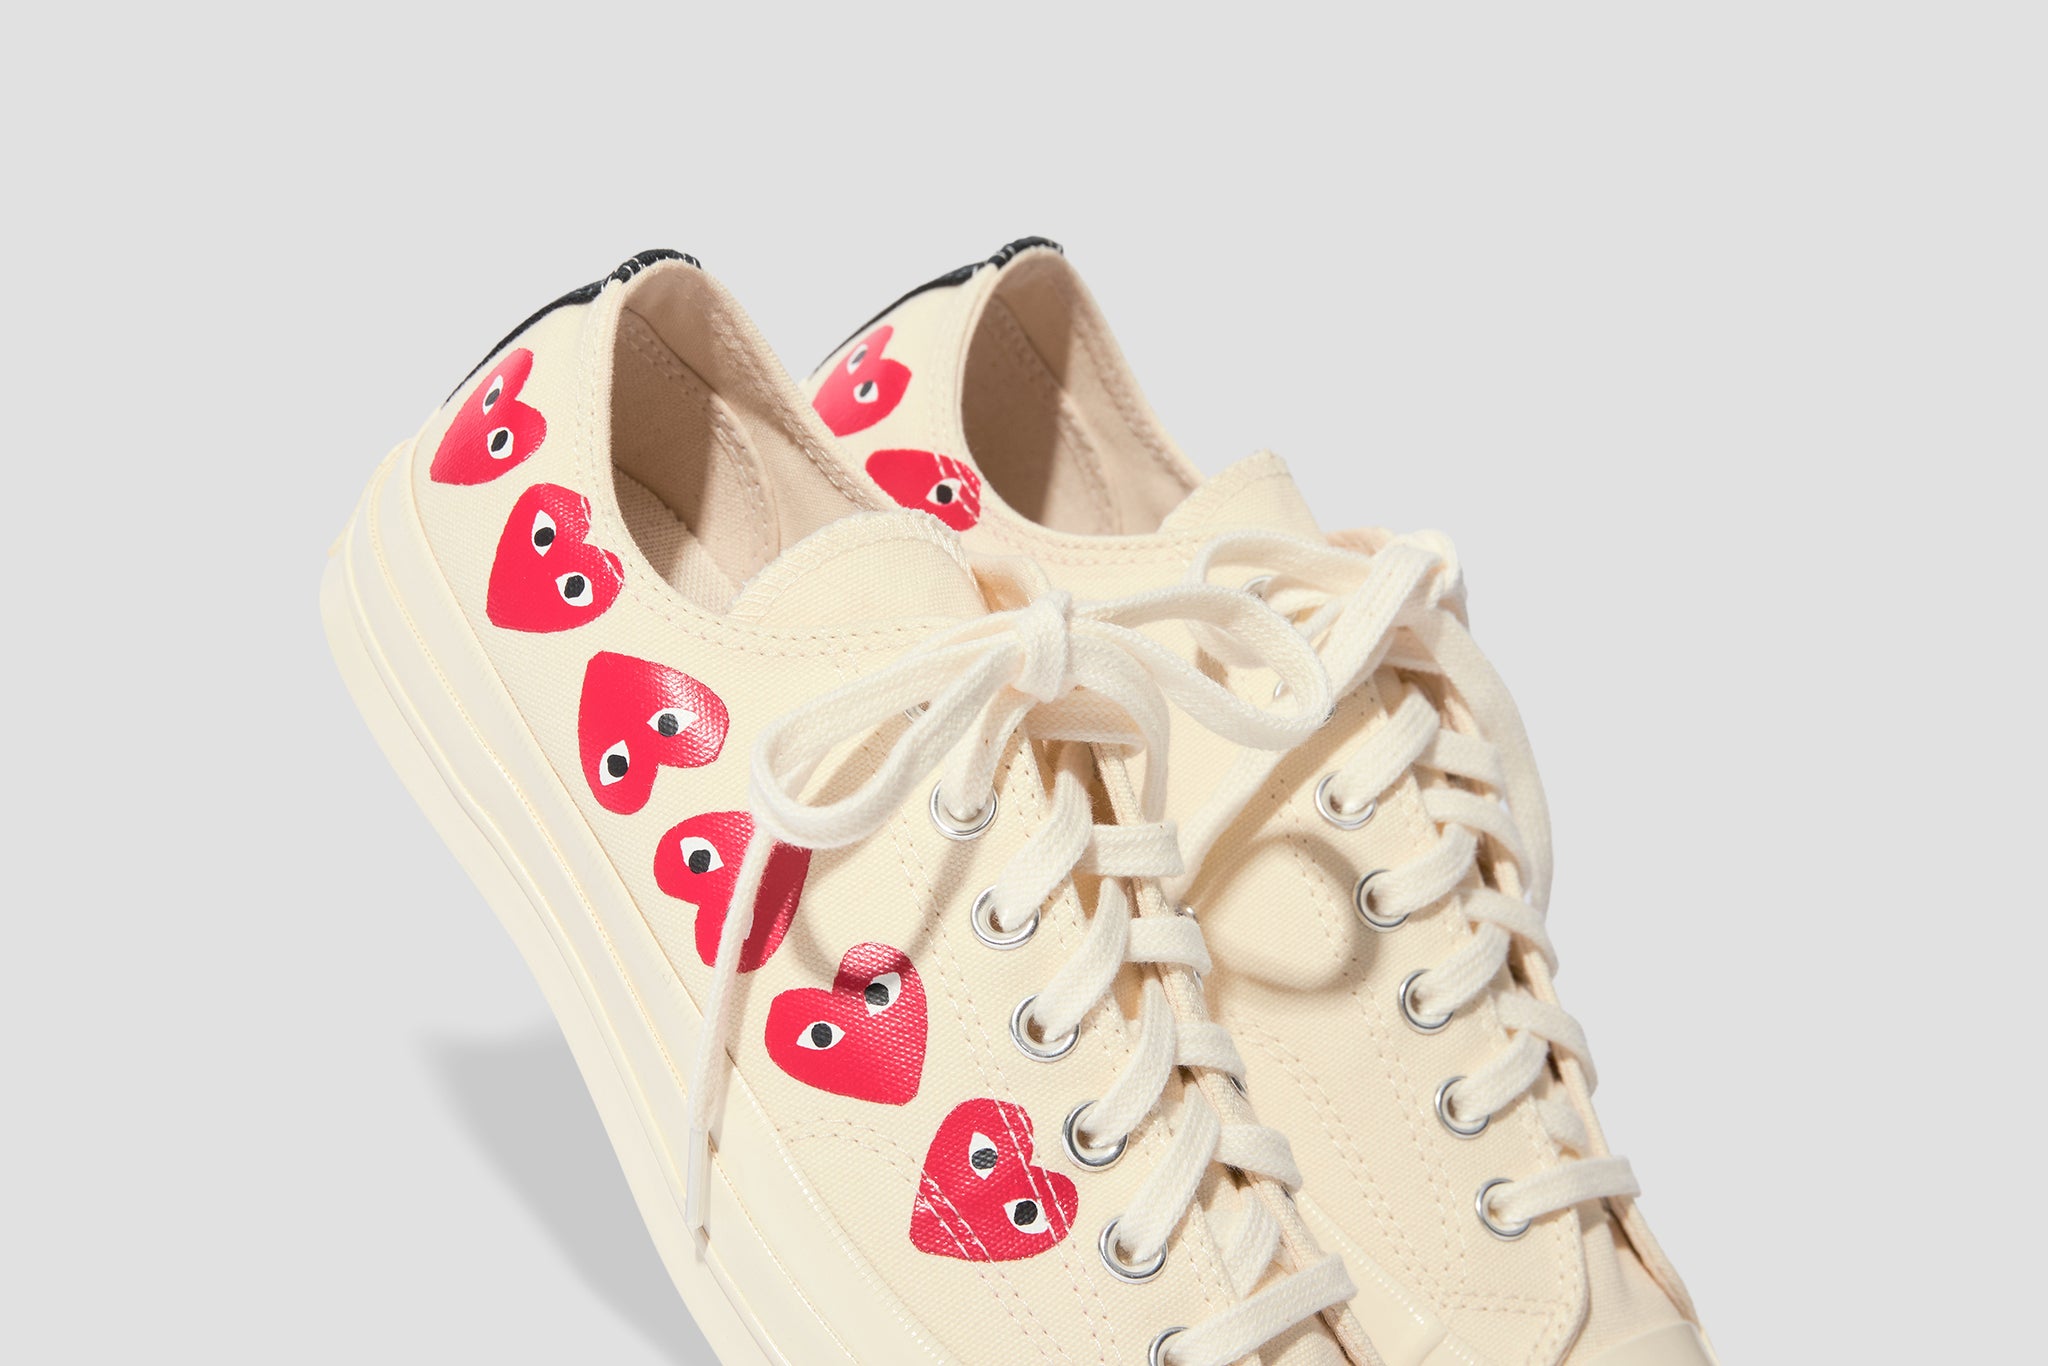 PLAY COMME DES GARÇONS X CONVERSE MULTI RED HEART CHUCK TAYLOR ALL STAR '70 LOW P1K117 Off white